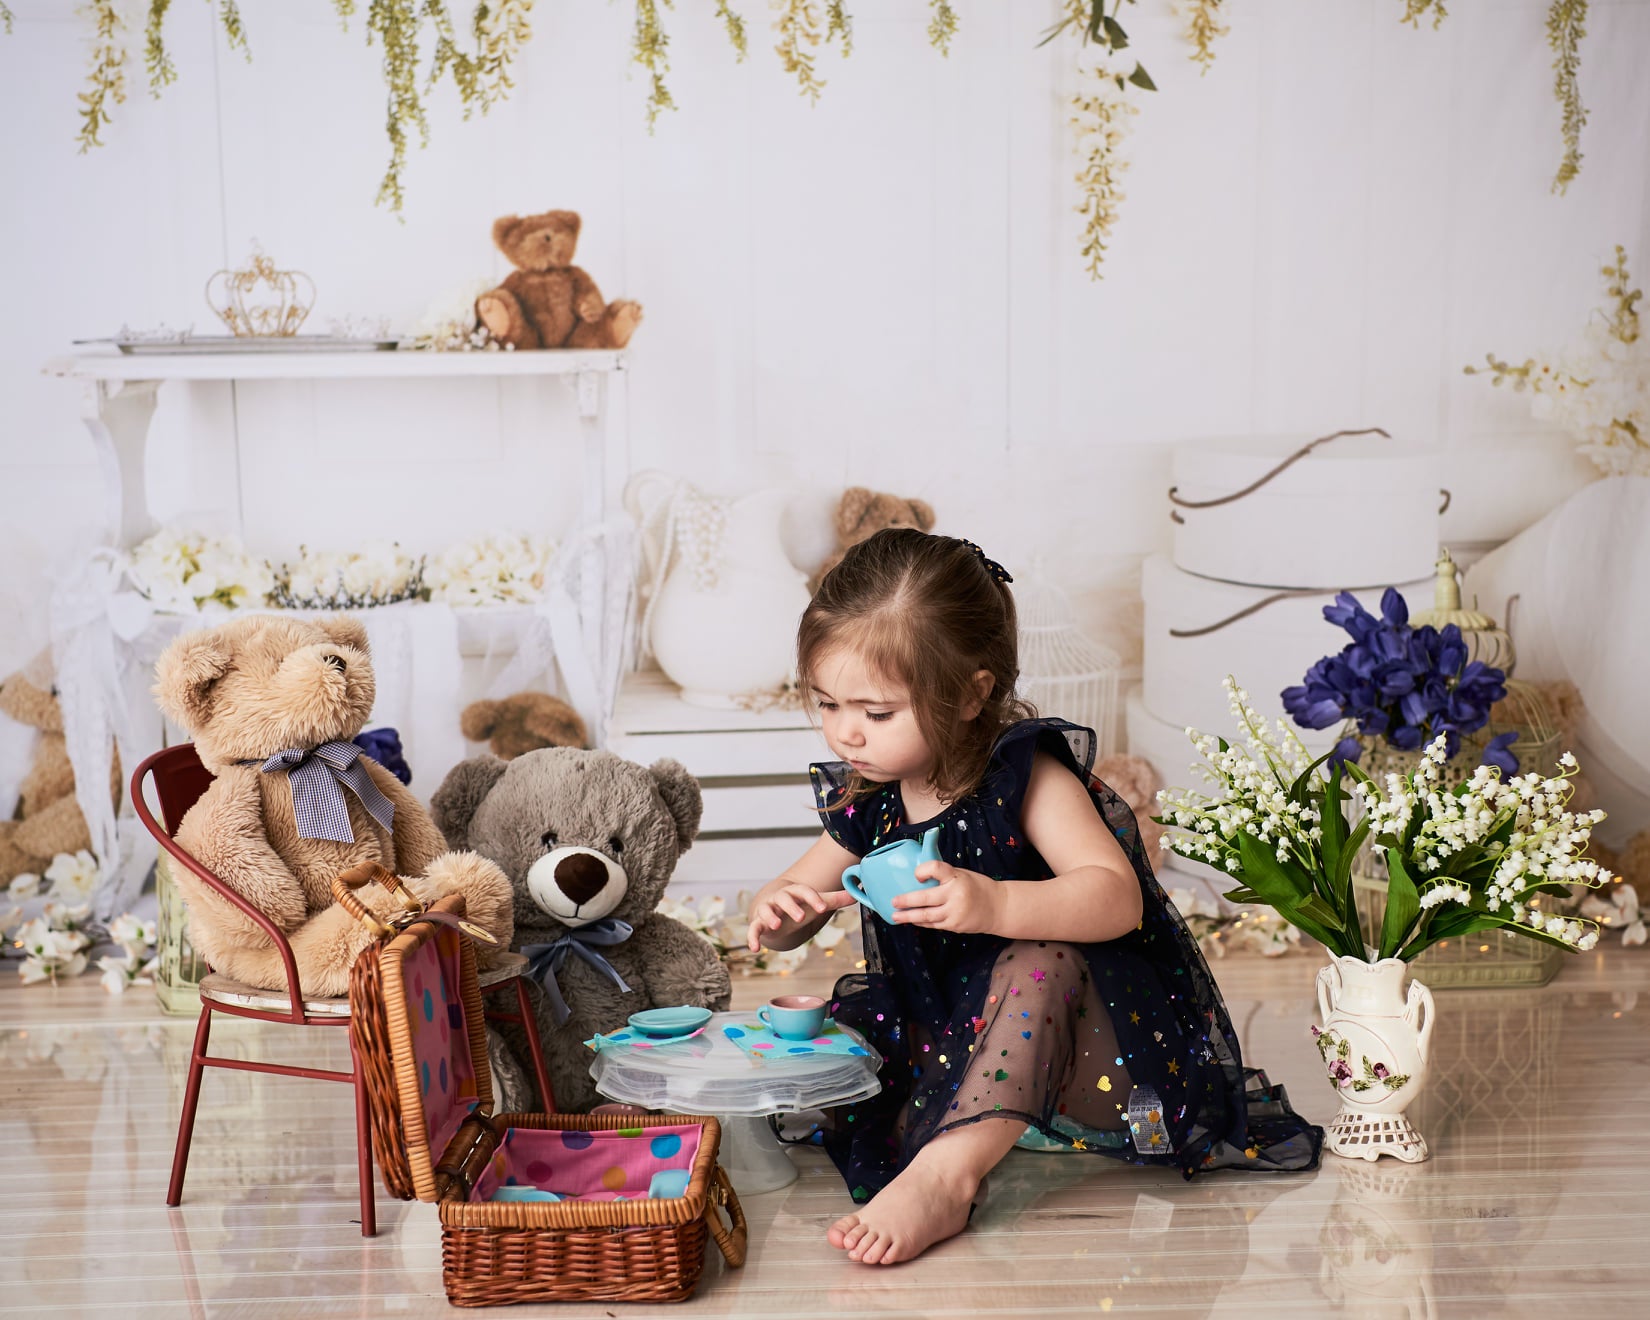 Kate Teddy Bear Vintage Florals Spring Backdrop designed by Arica Kirby